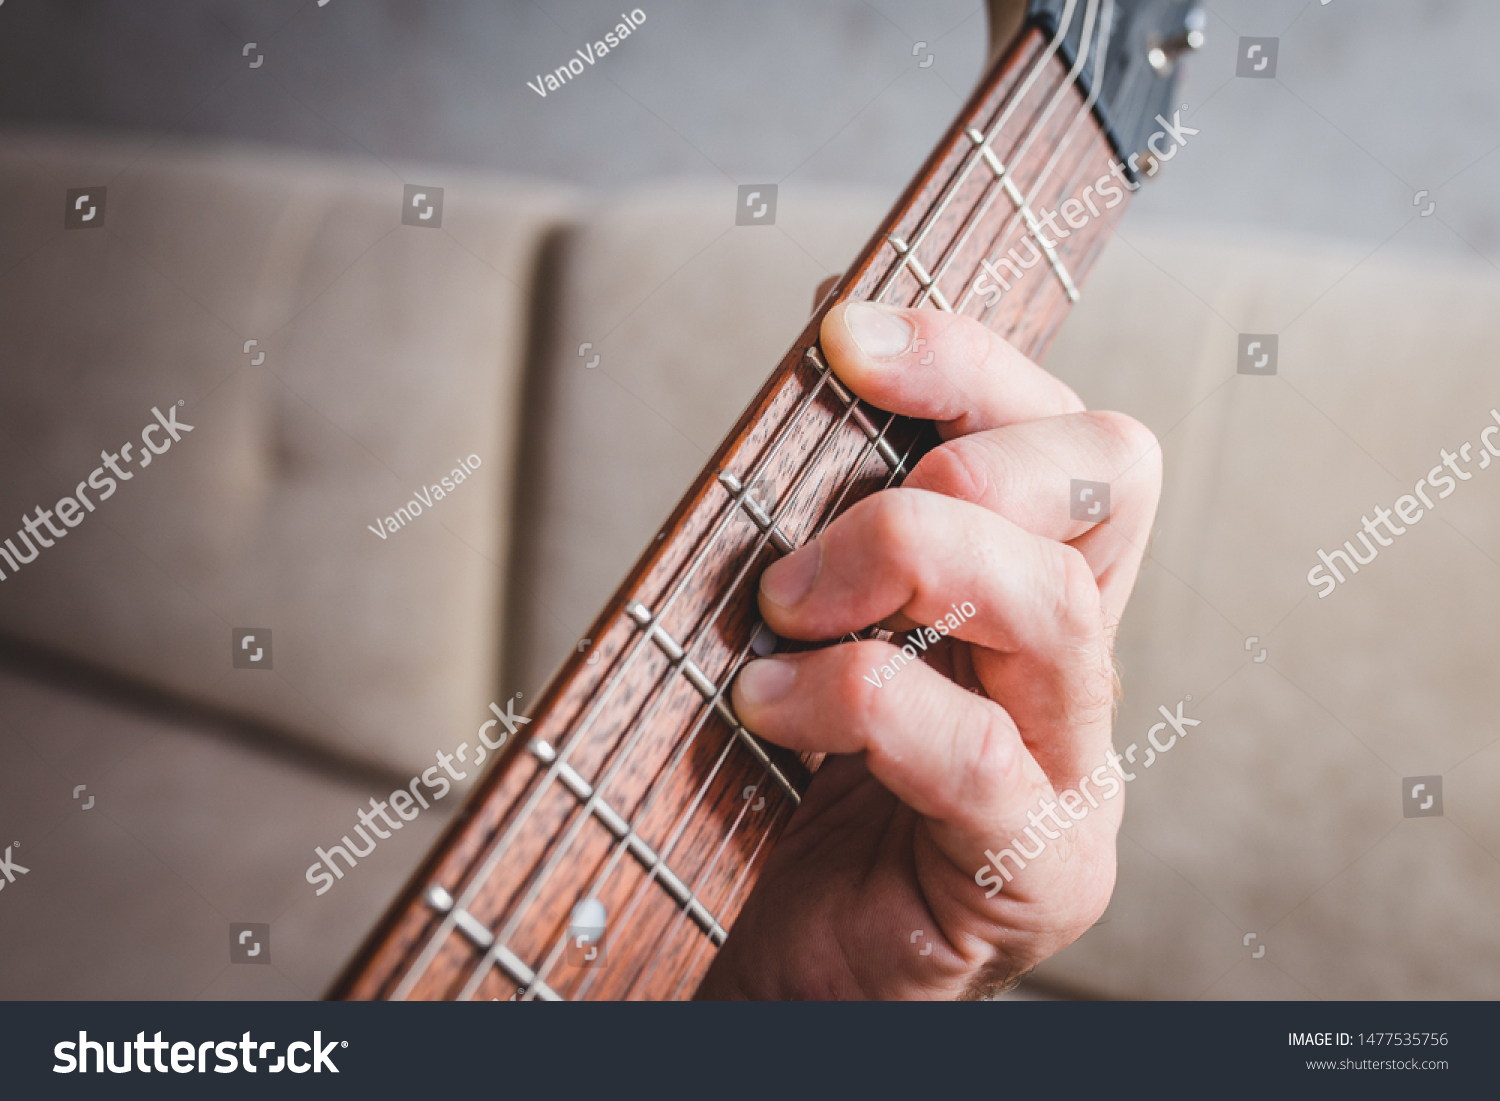 Cm chord - close-up male Caucasian hand takes a chord on a 6 string guitar #1477535756